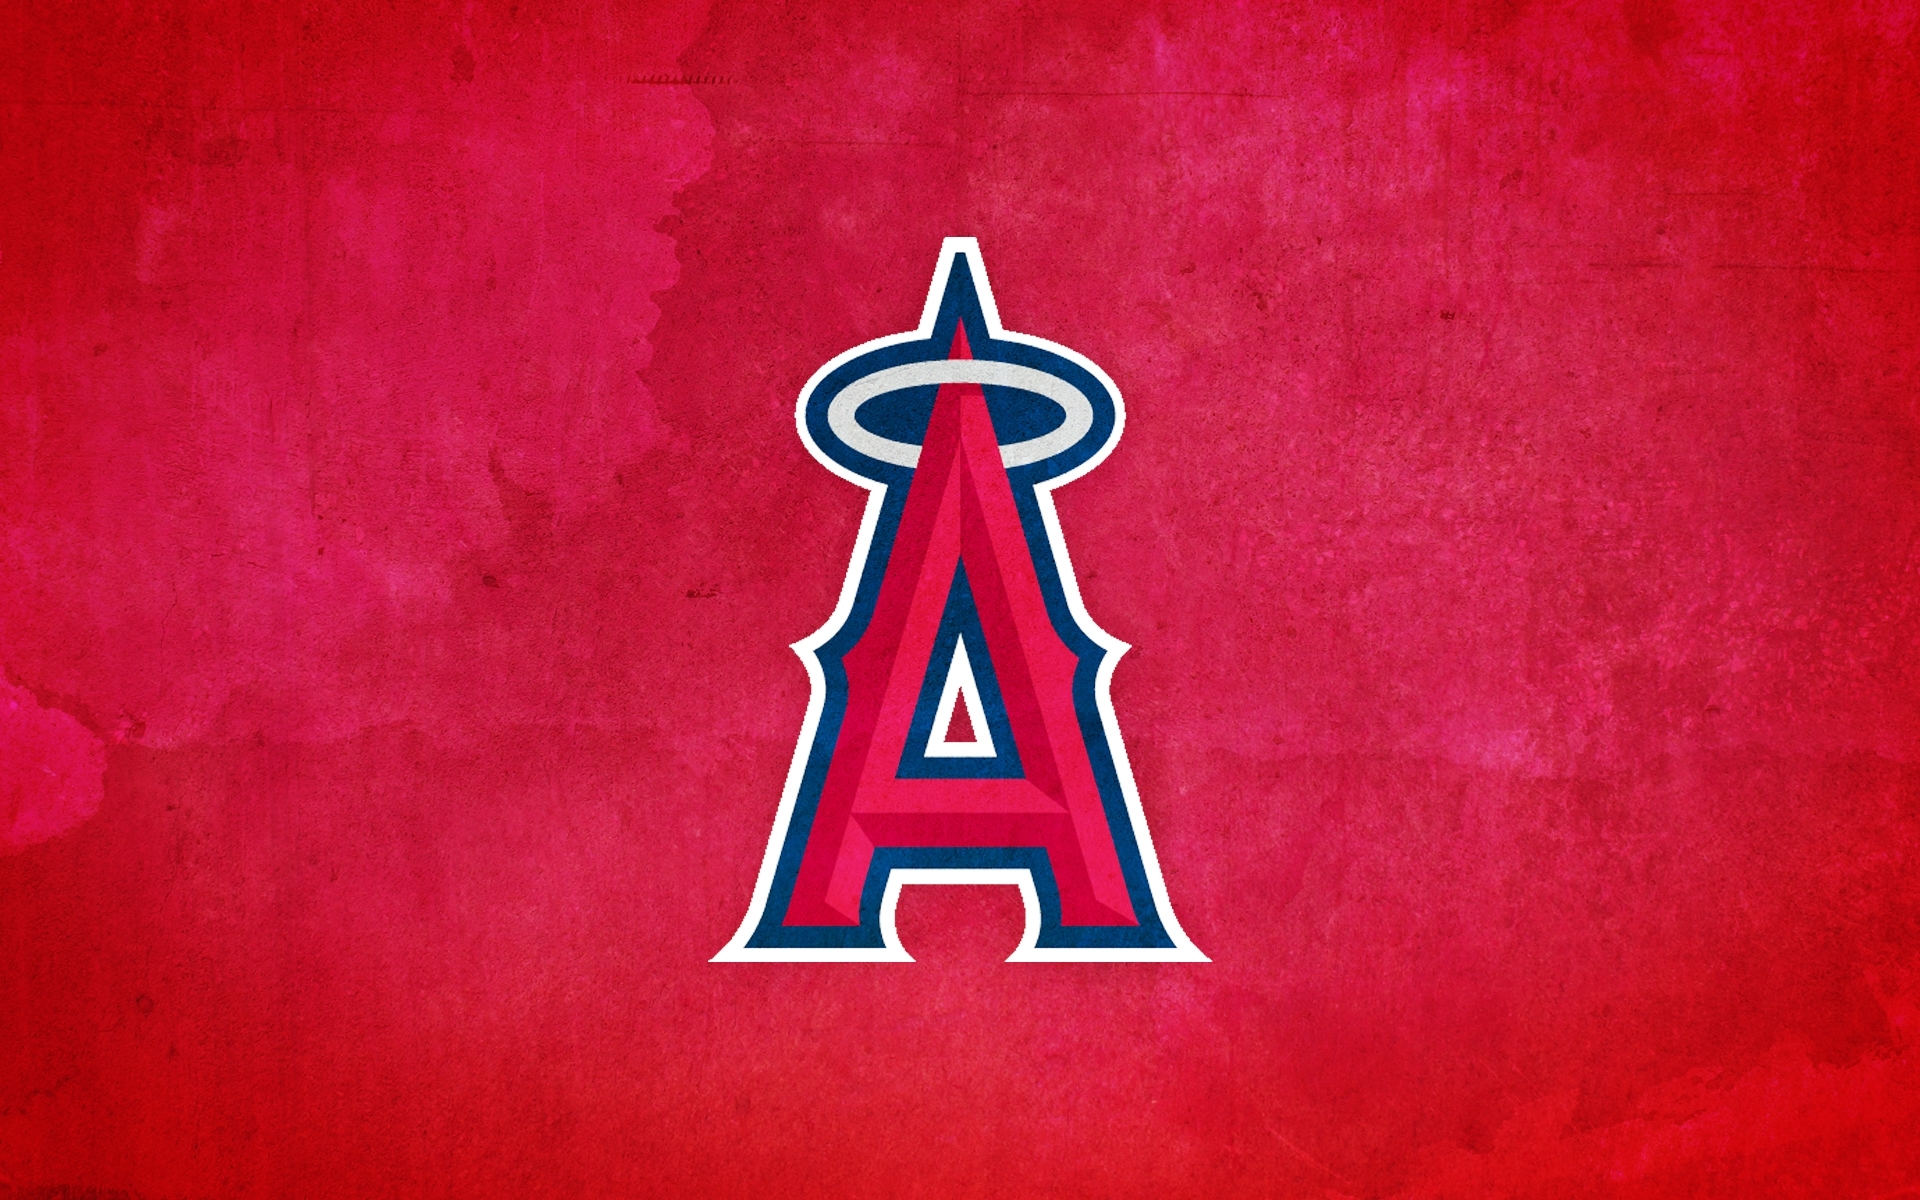 10 Best Los Angeles Angels Wallpaper FULL HD 1920×1080 For PC Background